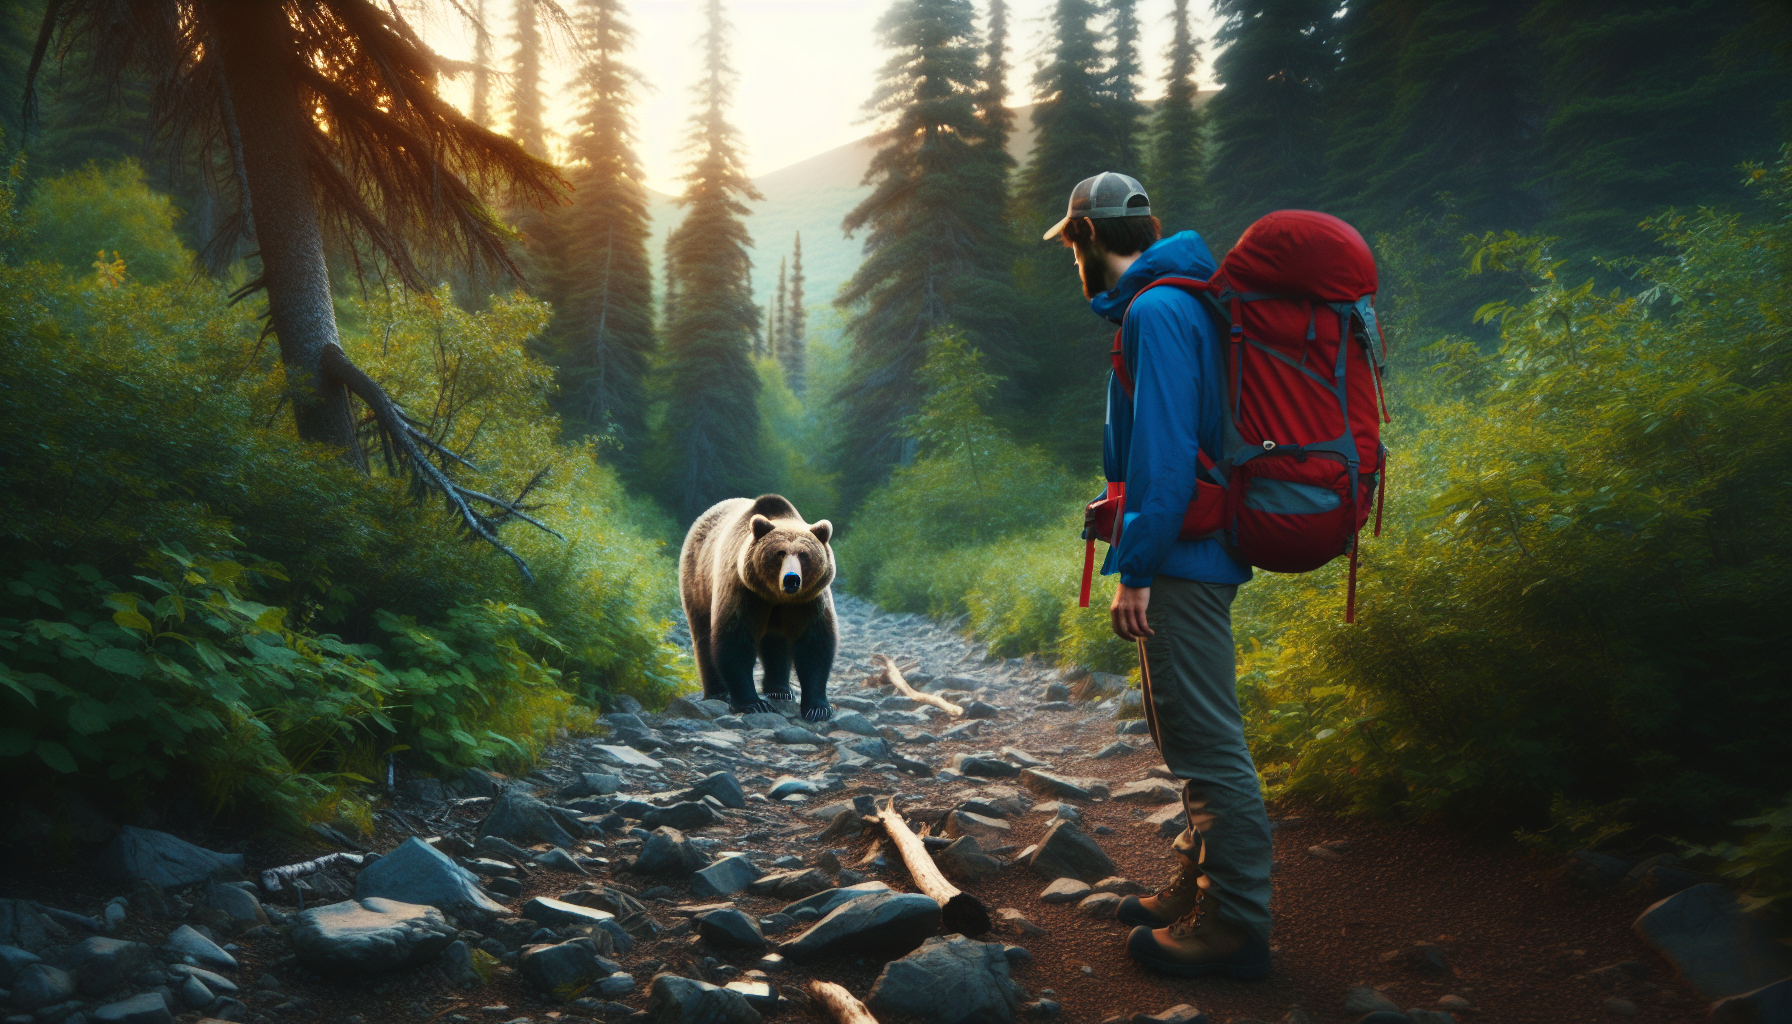 Essential Guide: How to Stay Safe from Wildlife While Backpacking in Remote Areas